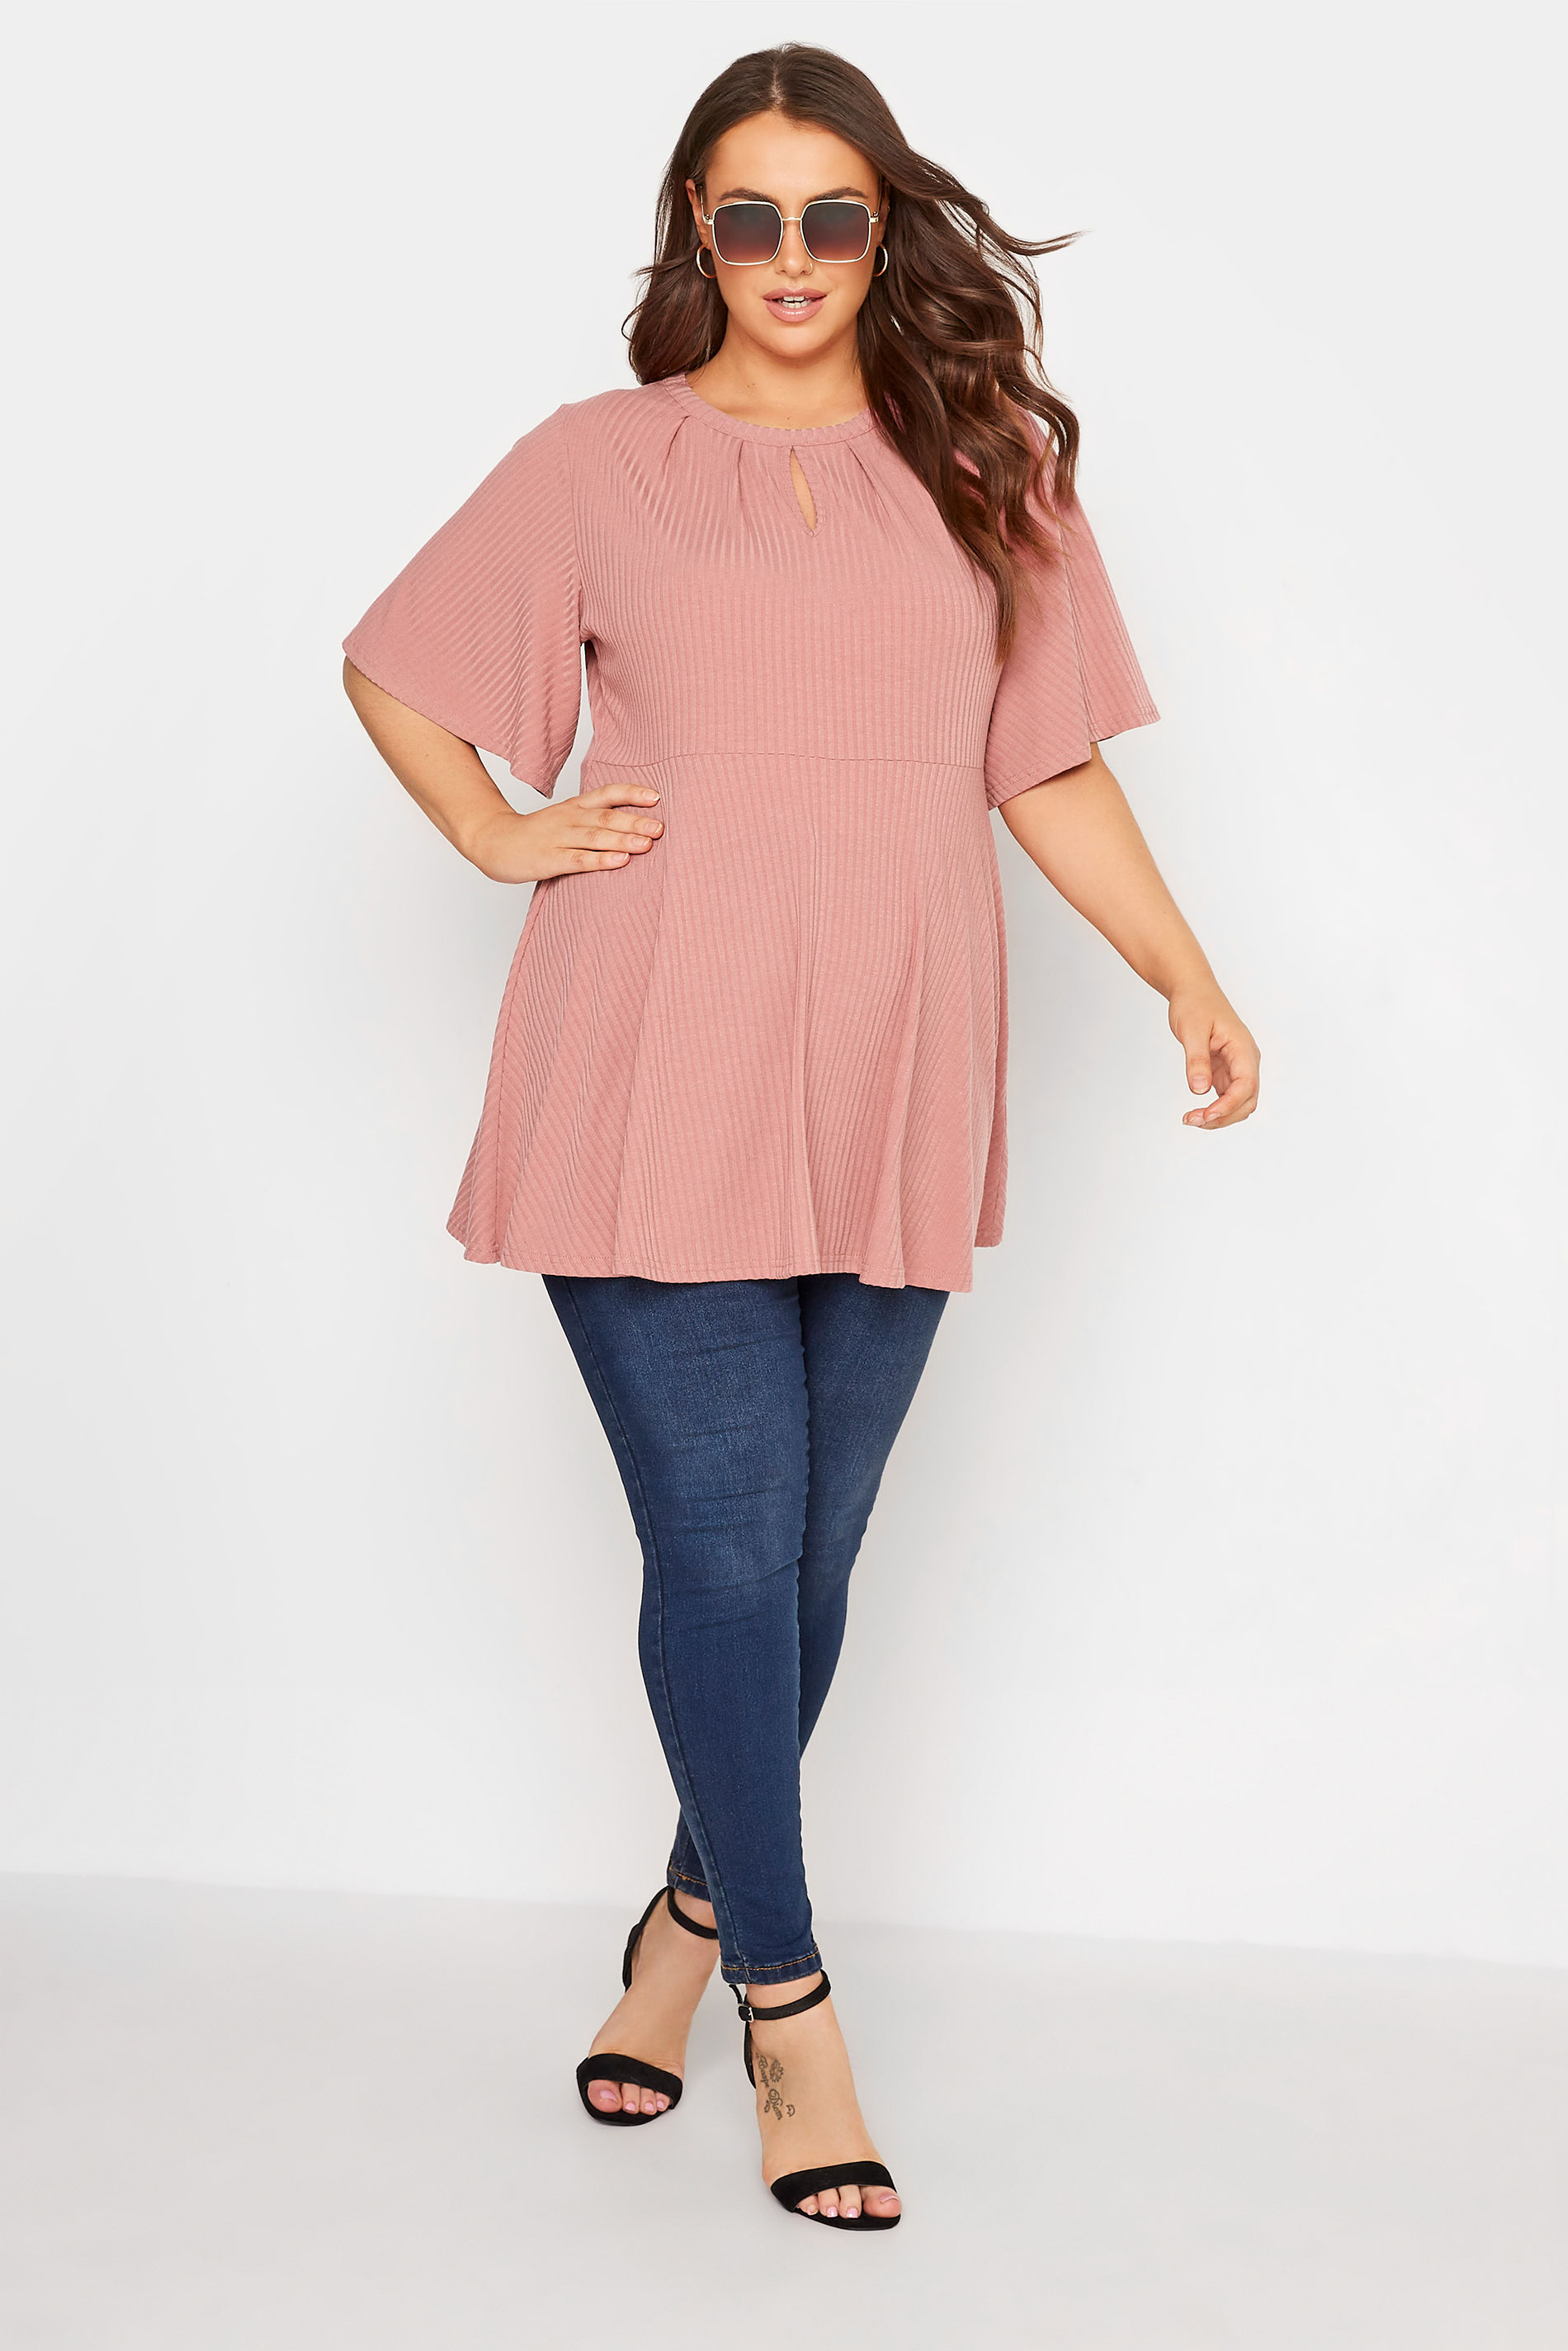 LIMITED COLLECTION Plus Size Dusky Pink Keyhole Peplum Top  | Yours Clothing  2